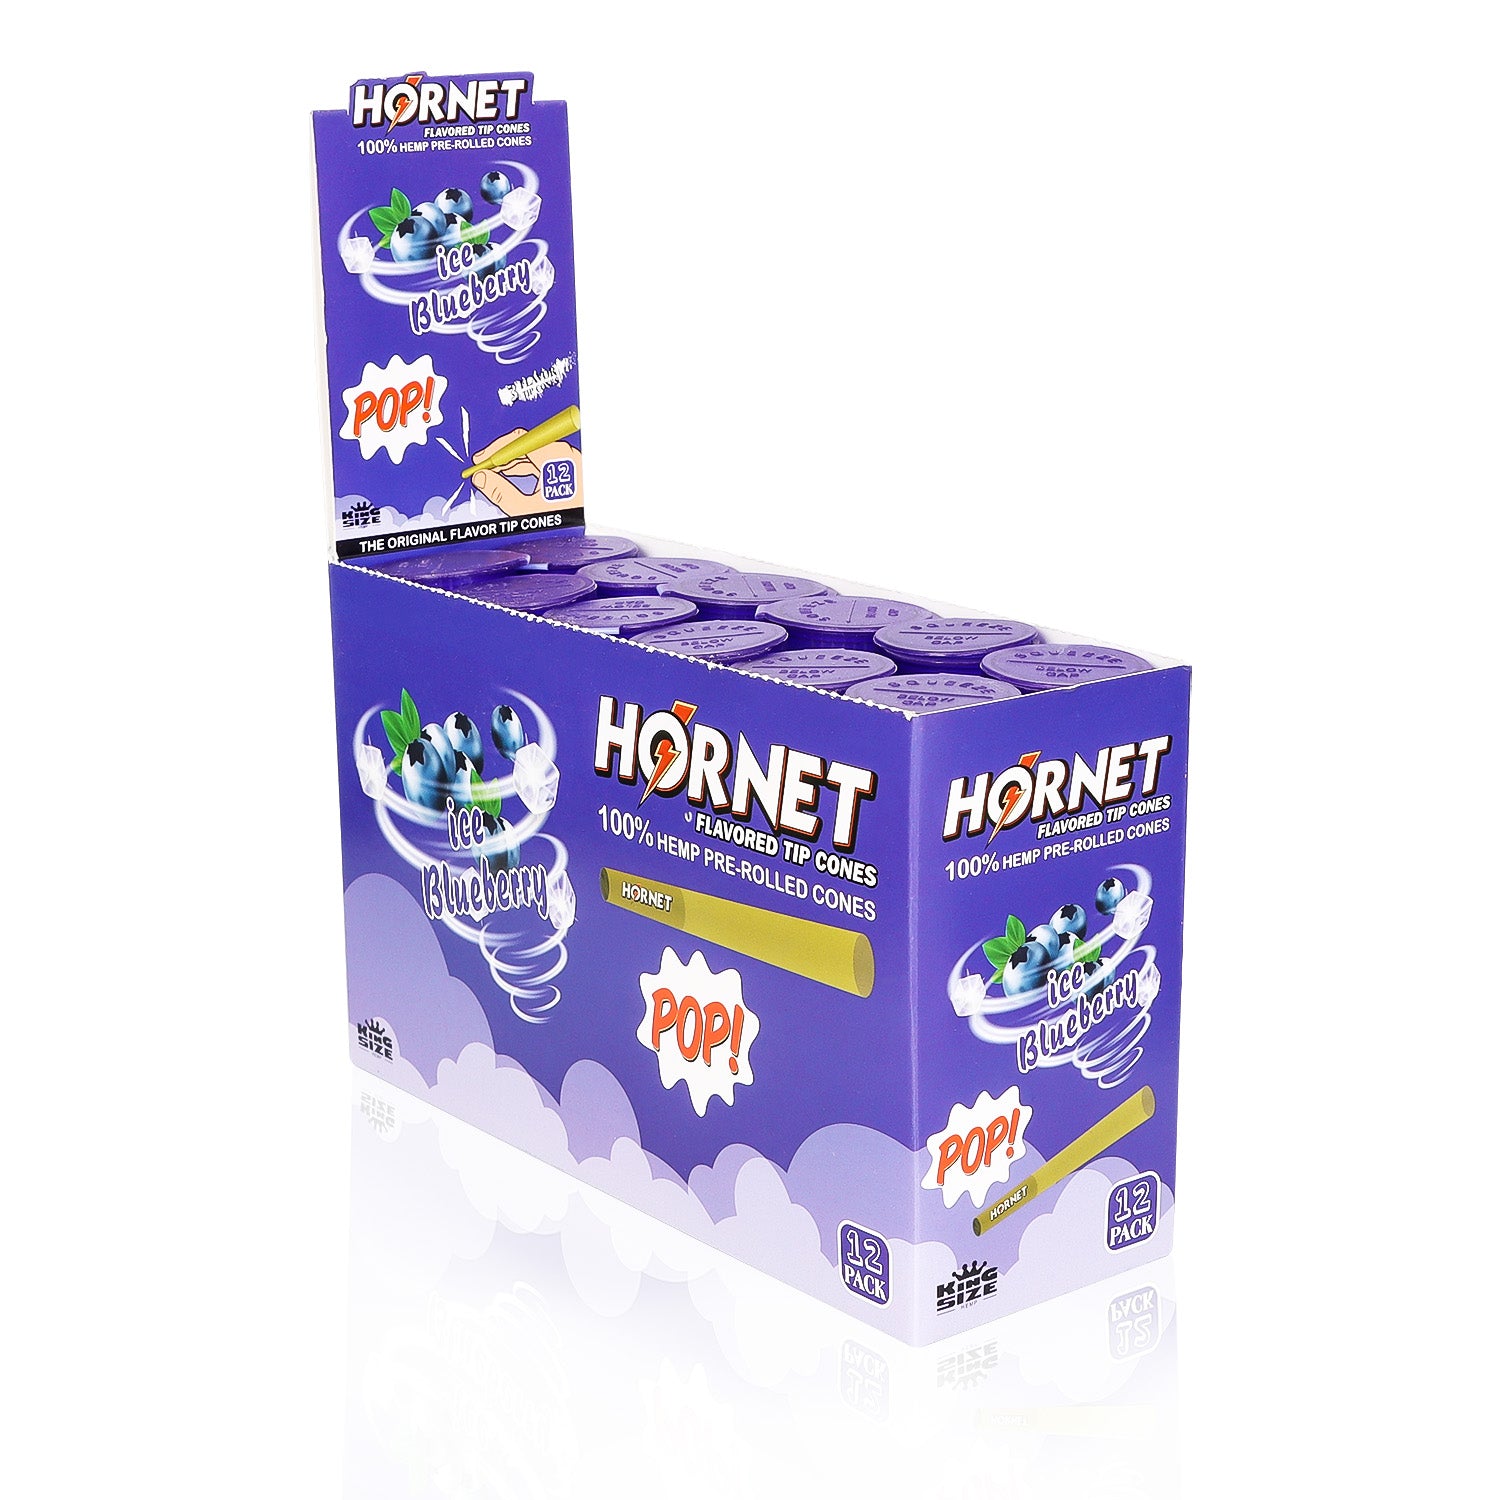 HORNET Blueberry Flavors Pre Rolled Cones, King Size Pre Rolled Rolling Paper With Tips, Slow Burning Rolling Cones & Flavored Pop, 3 PCS / Tube, 12 Tubes / Box